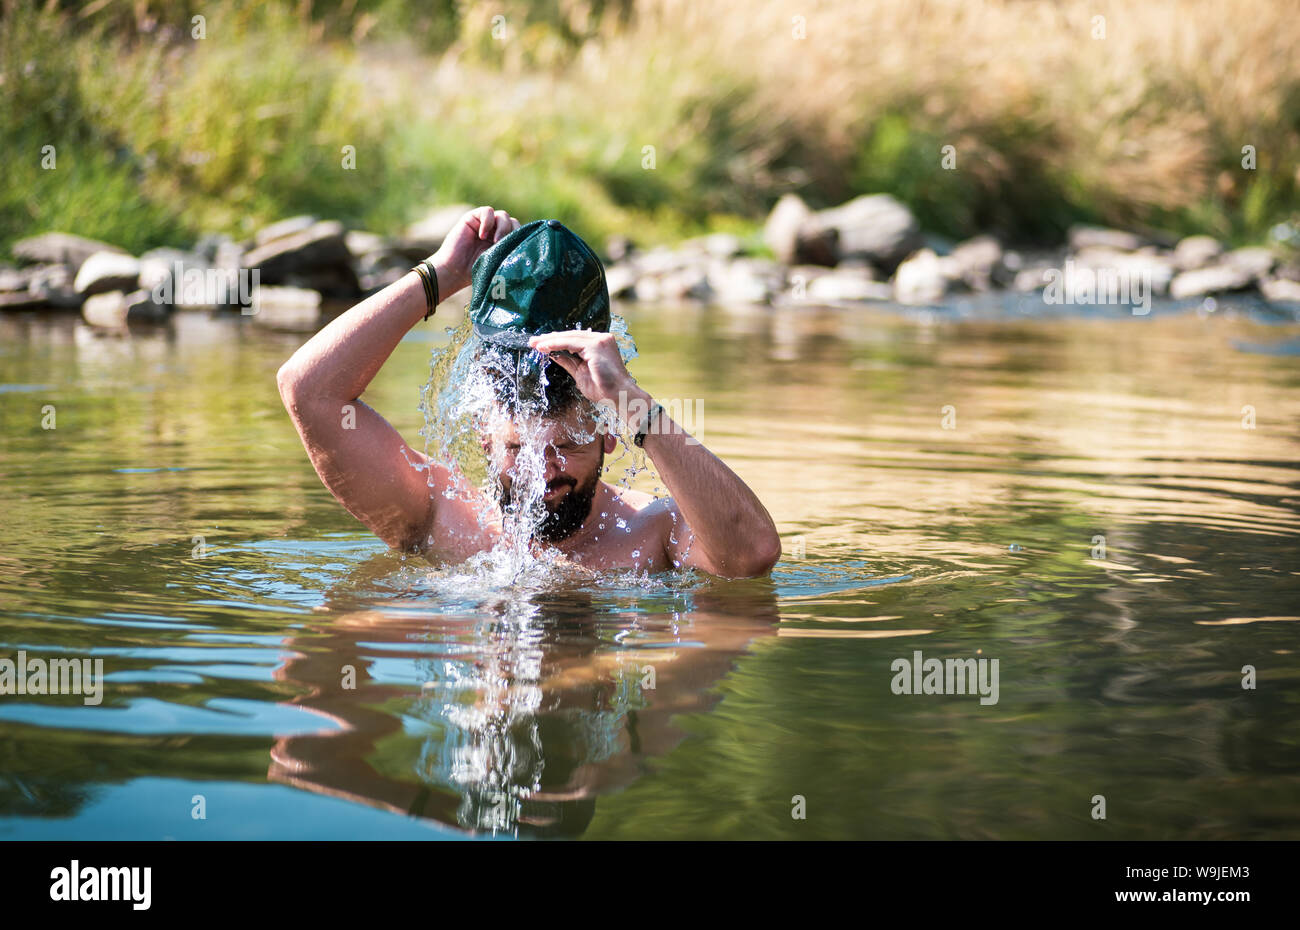 Man cooling down in a river on a hot summer day Stock Photo